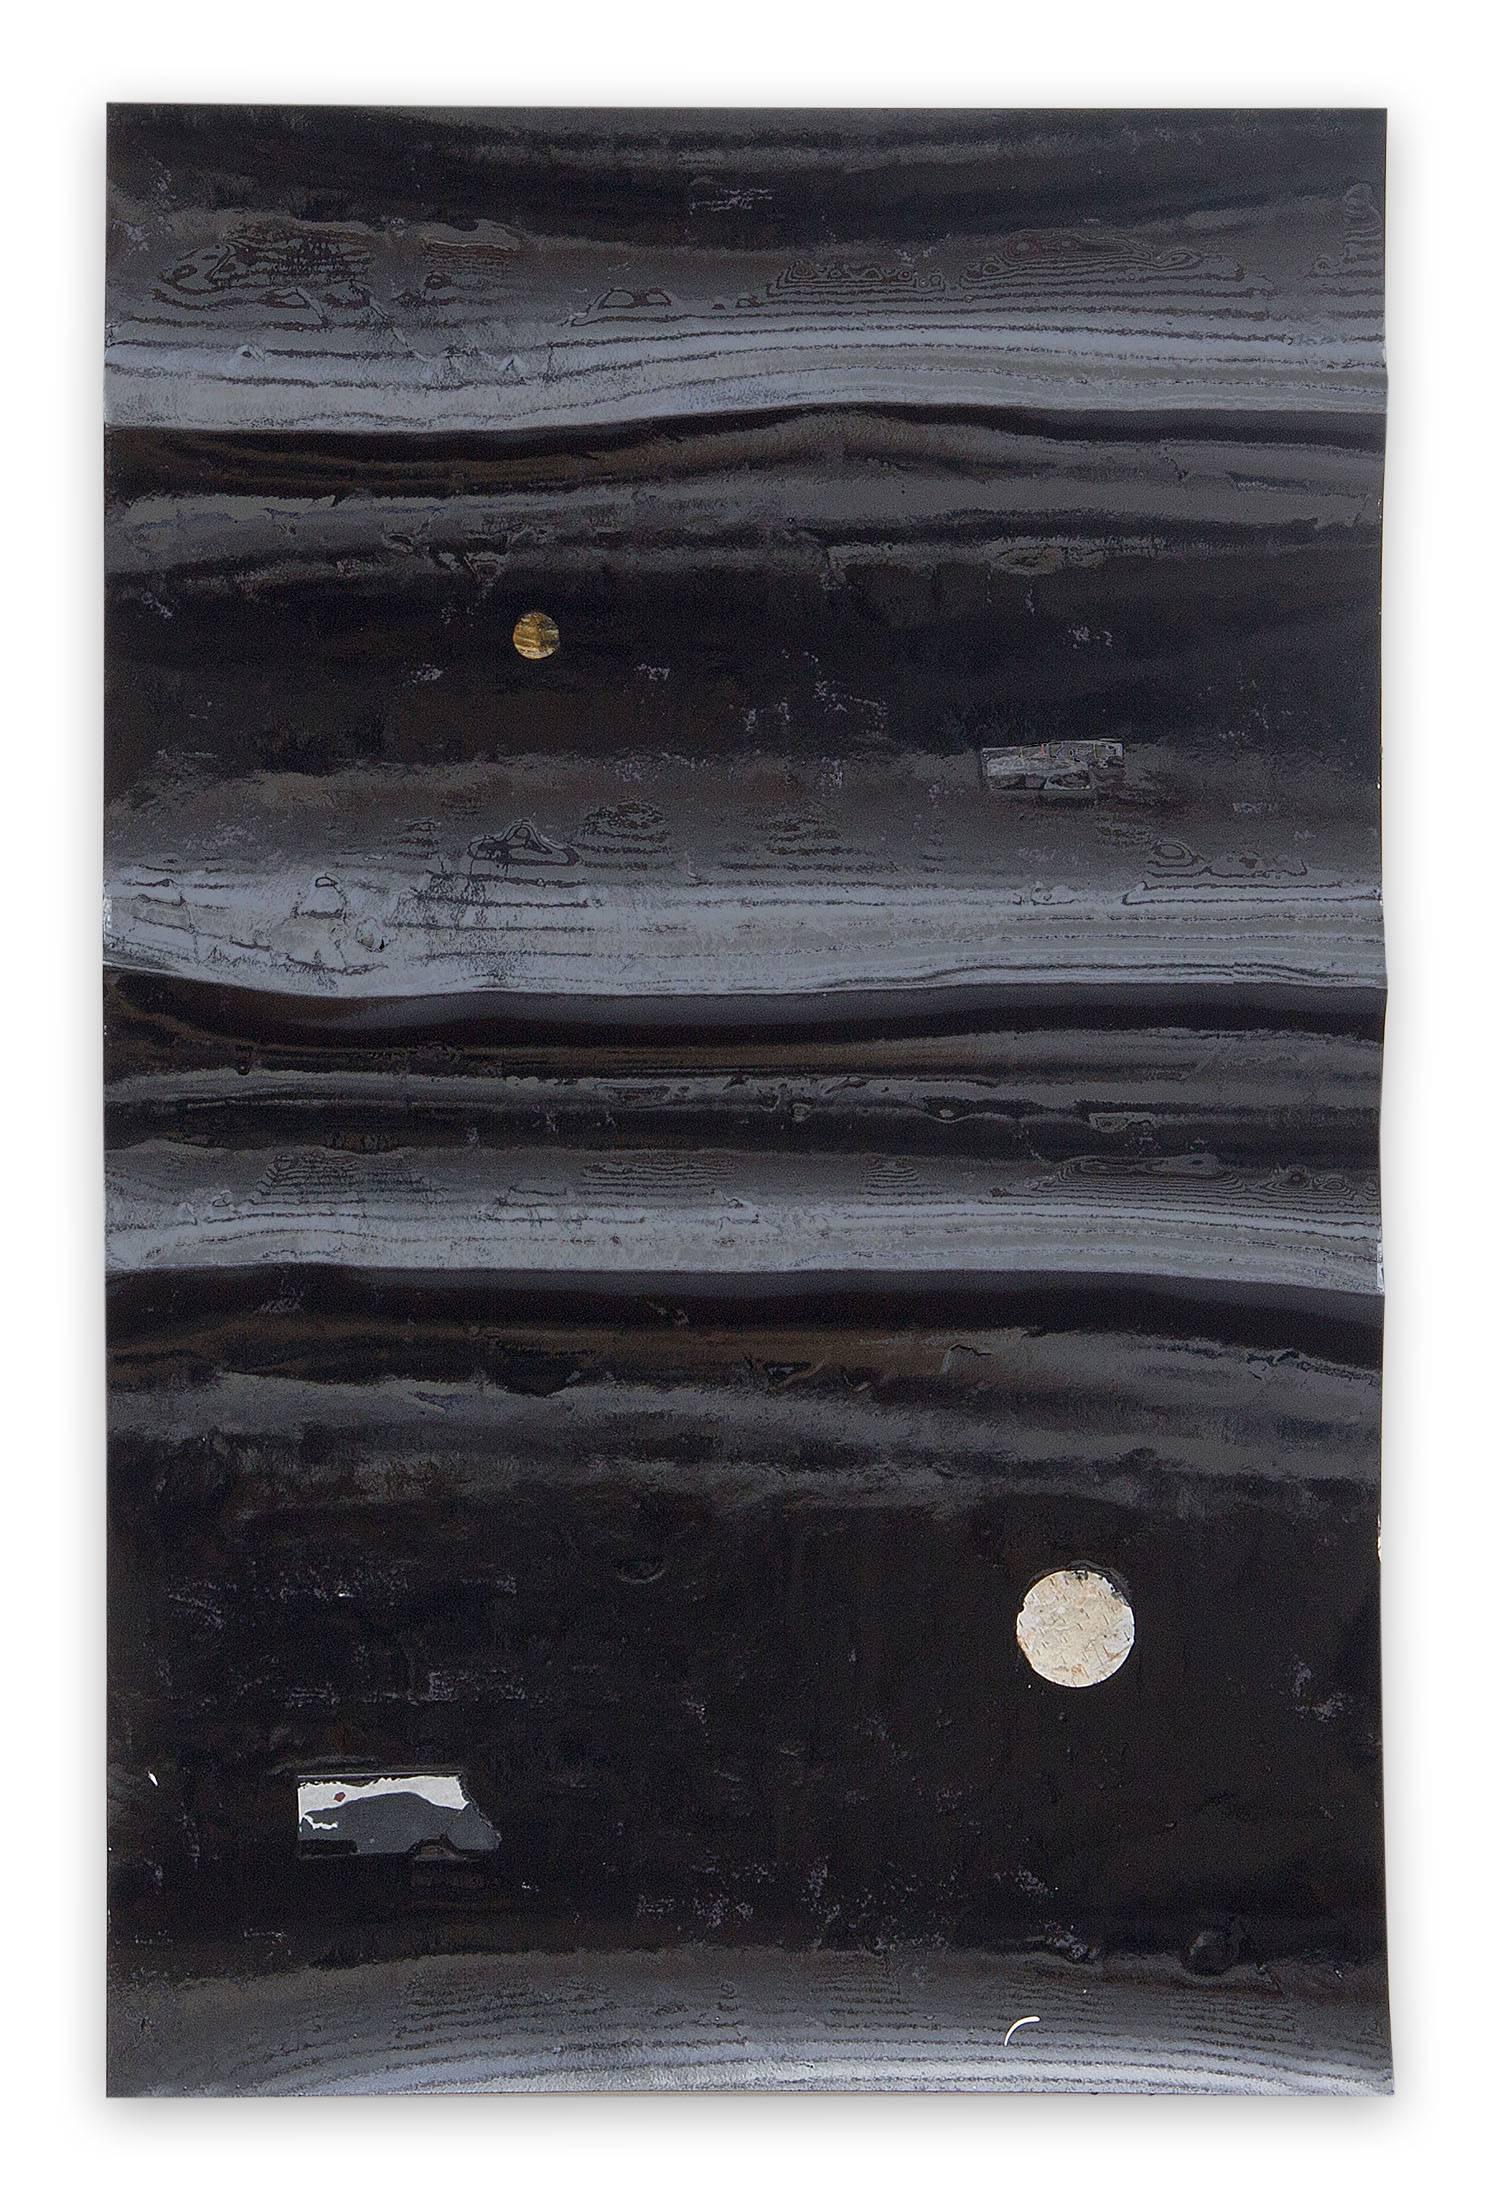 Abstract Painting Harald Kroner  - Black River 26 (Œuvre abstraite sur papier)